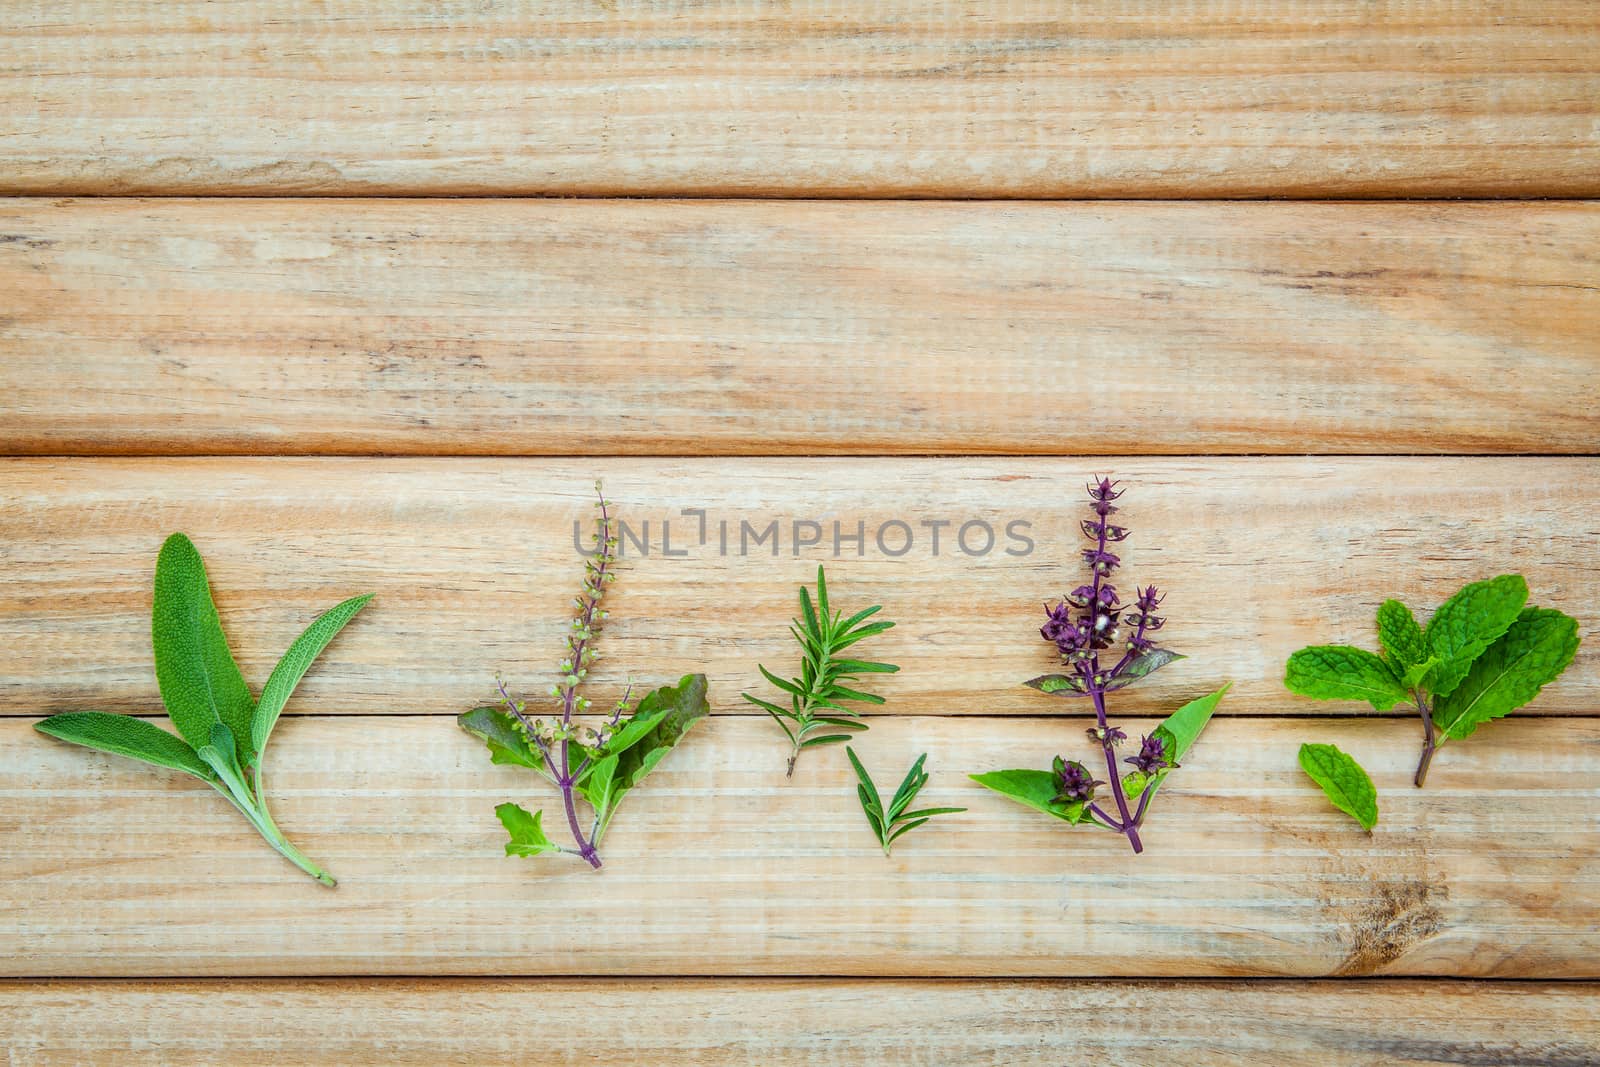 Various fresh herbs from the garden holy basil flower, basil flower,rosemary, sage over rustic wooden background.